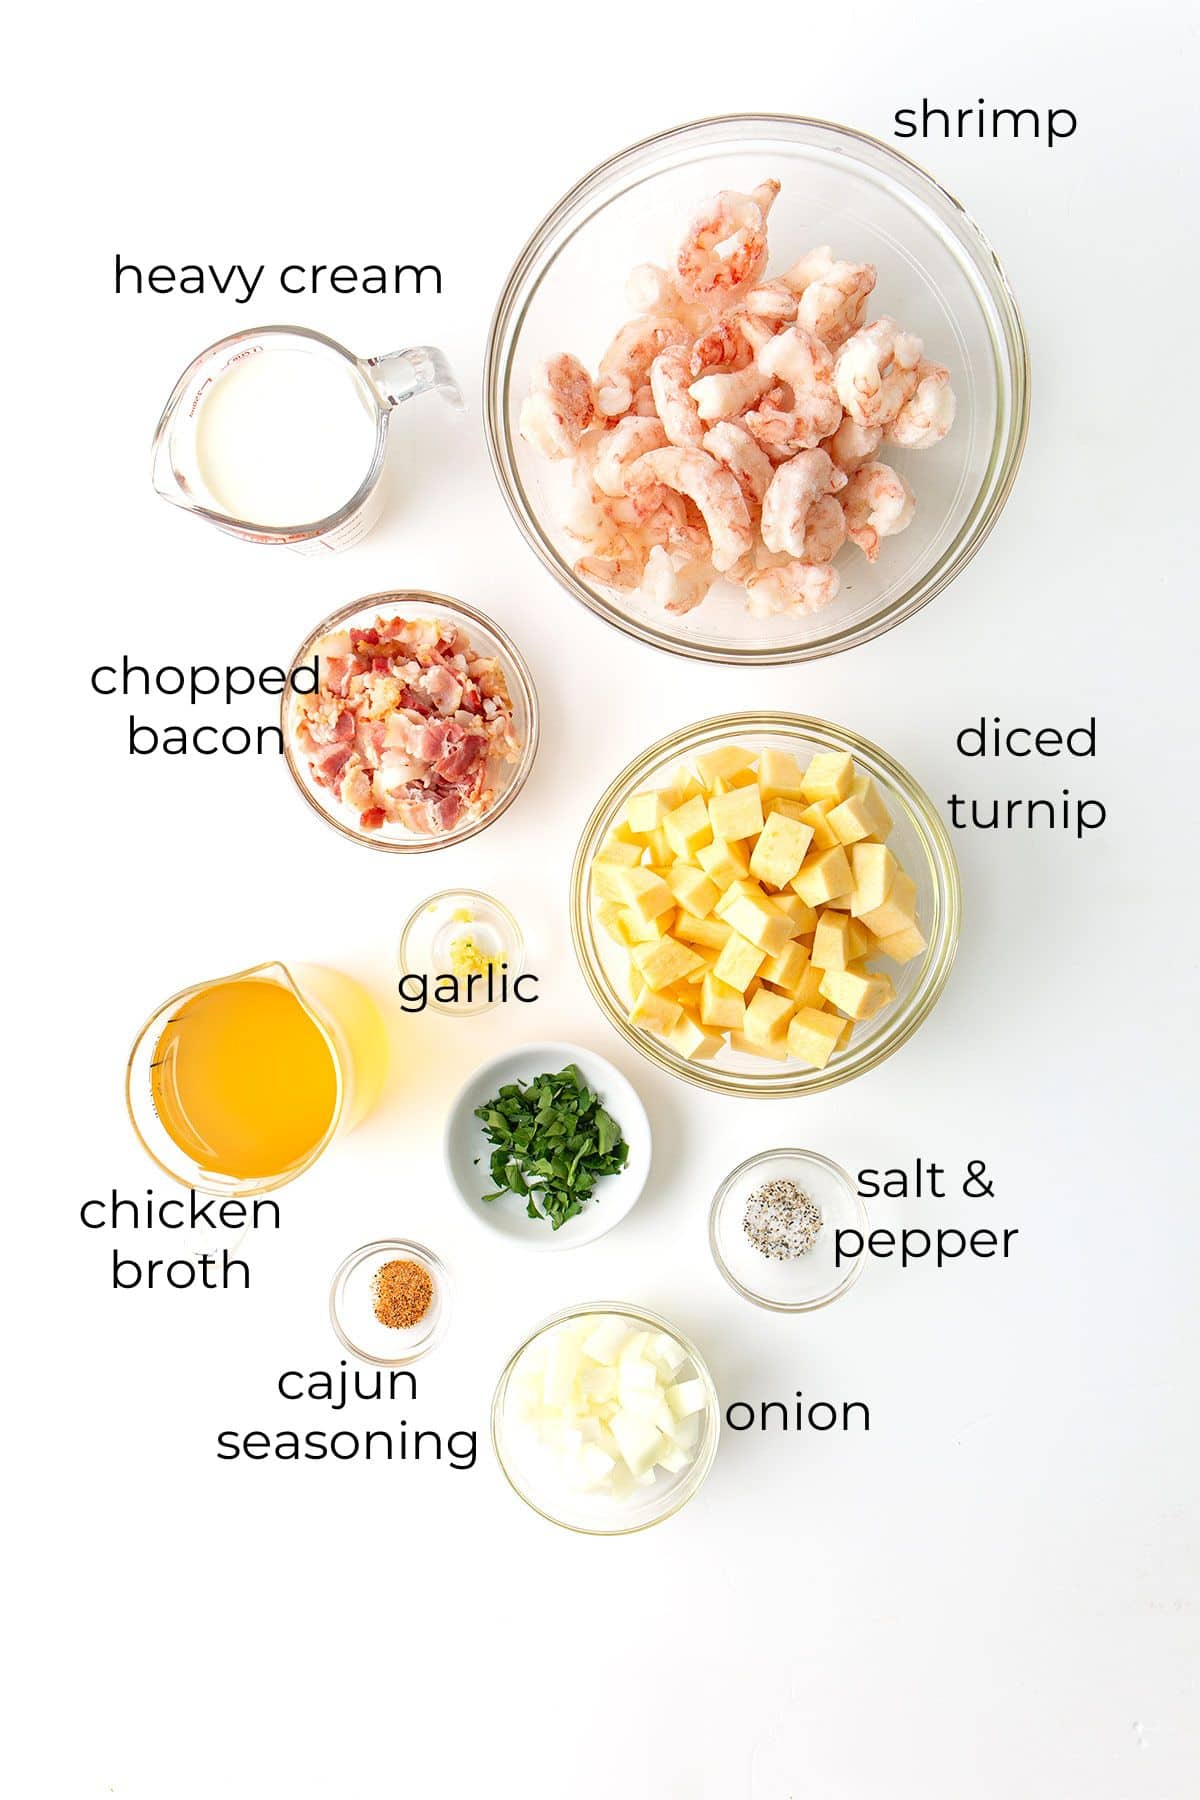 Top down image of ingredients needed for Shrimp Chowder.